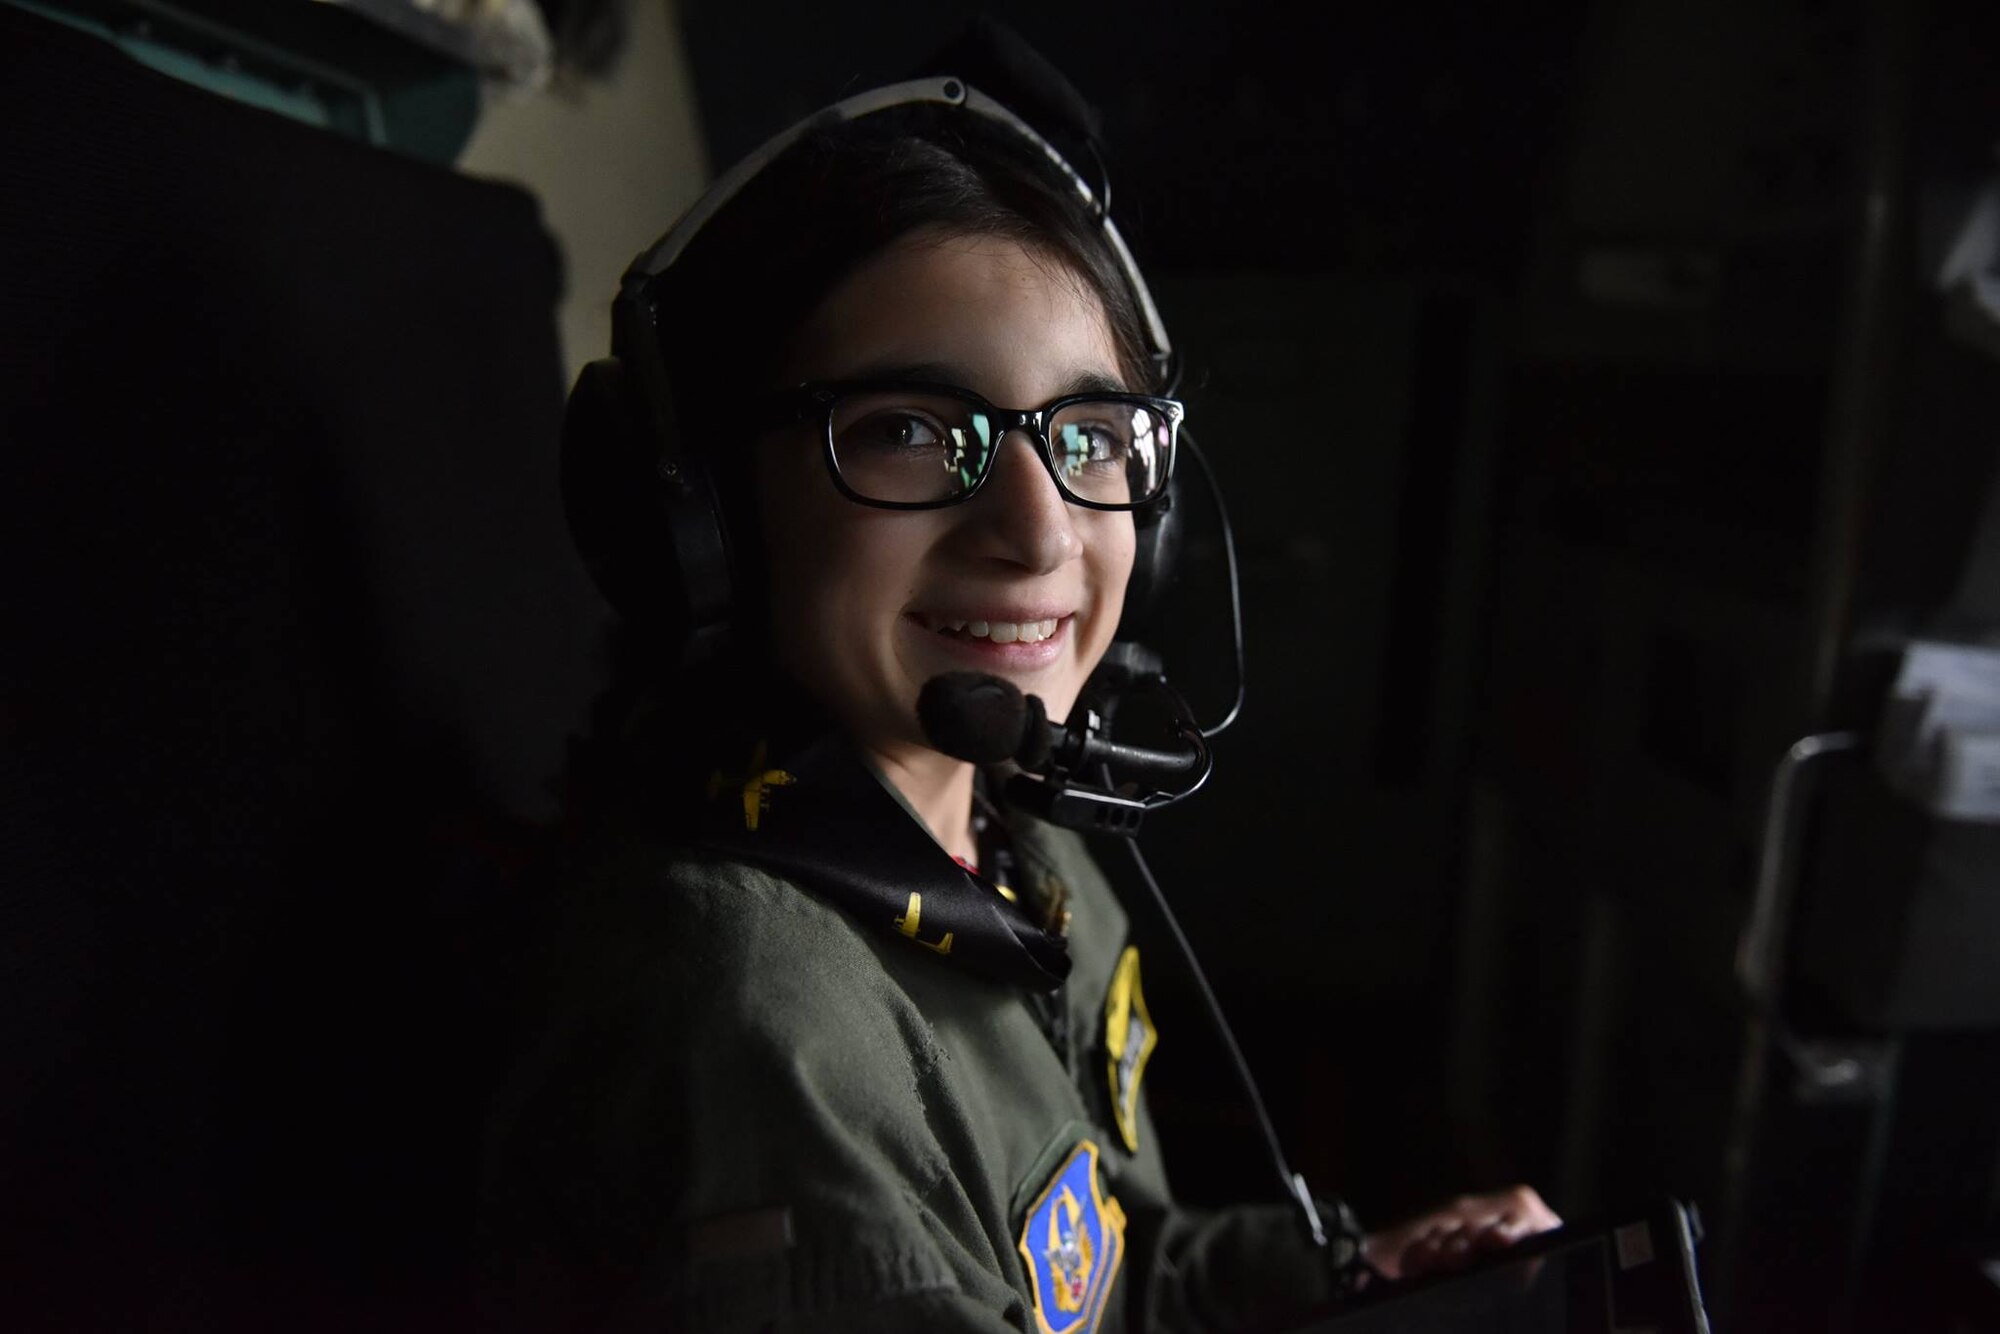 12 year-old Norah Carter, honorary second lieutenant of the 911th Airlift Wing, sits in the cockpit of a C-130 Hercules aircraft at the Pittsburgh International Air Reserve Station, May 11, 2016. Norah was nominated for the Pilot for a Day program by her doctors with the Allegheny Health Network, where she is being treated for an undiagnosed genetic disorder. (U.S. Air Force Photo by Airman Bethany Feenstra)